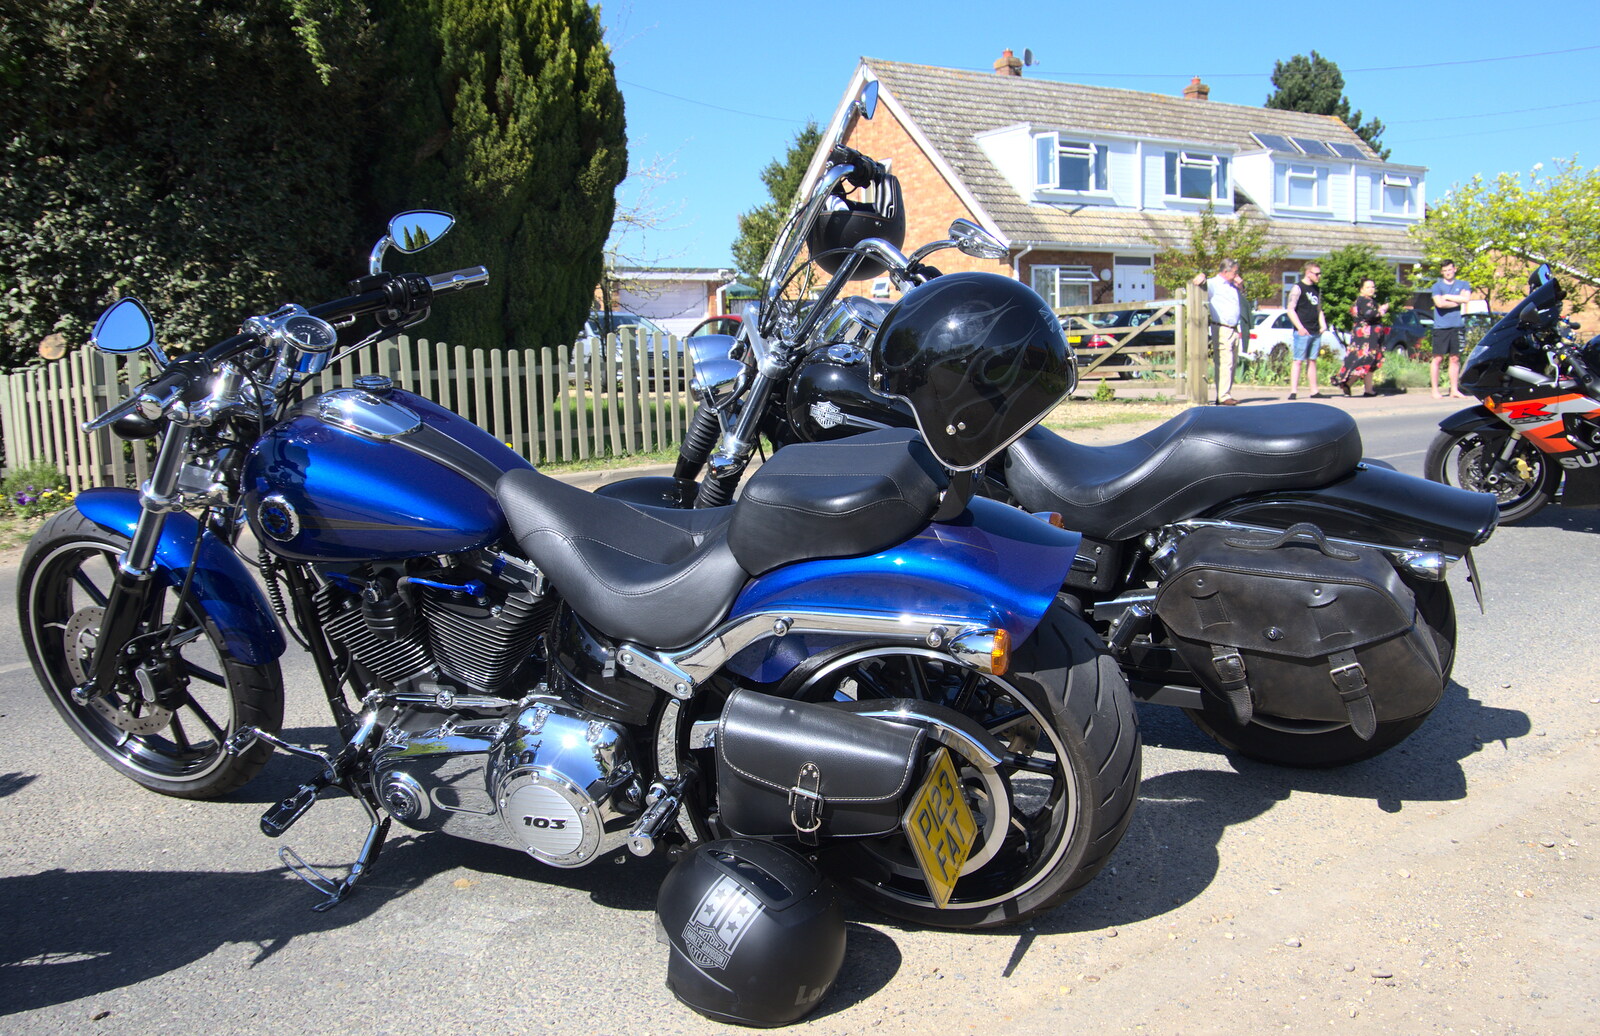 An electric-blue Harley from Beer, Bikes and Bands, Burston Crown, Burston, Norfolk - 6th May 2018